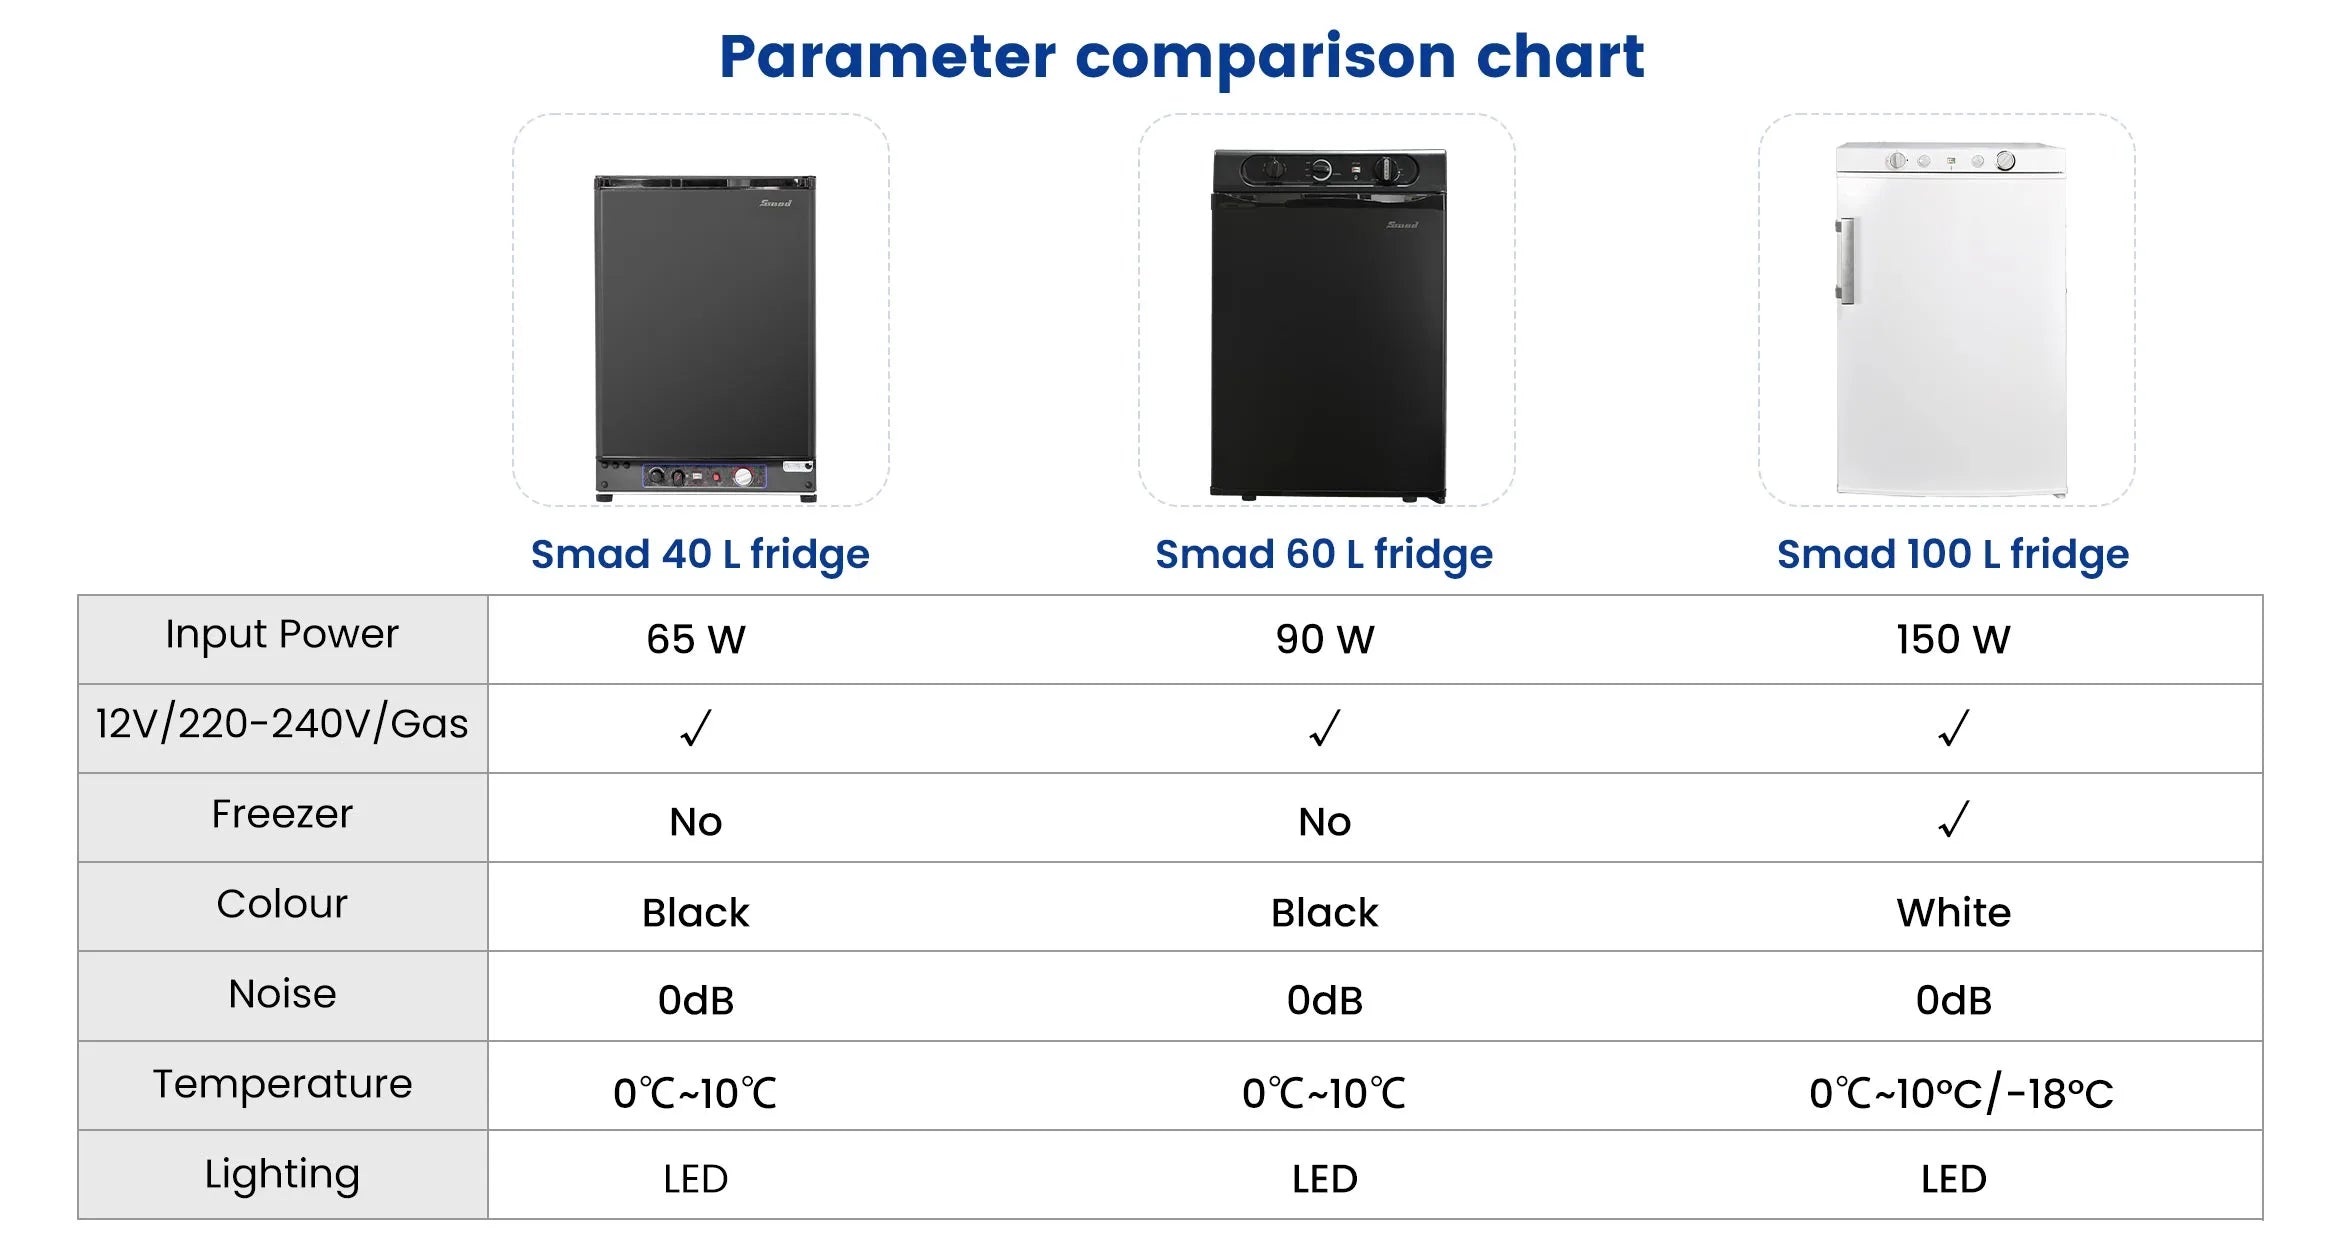 Specification comparison table for DSG-40L refrigerator in the UK